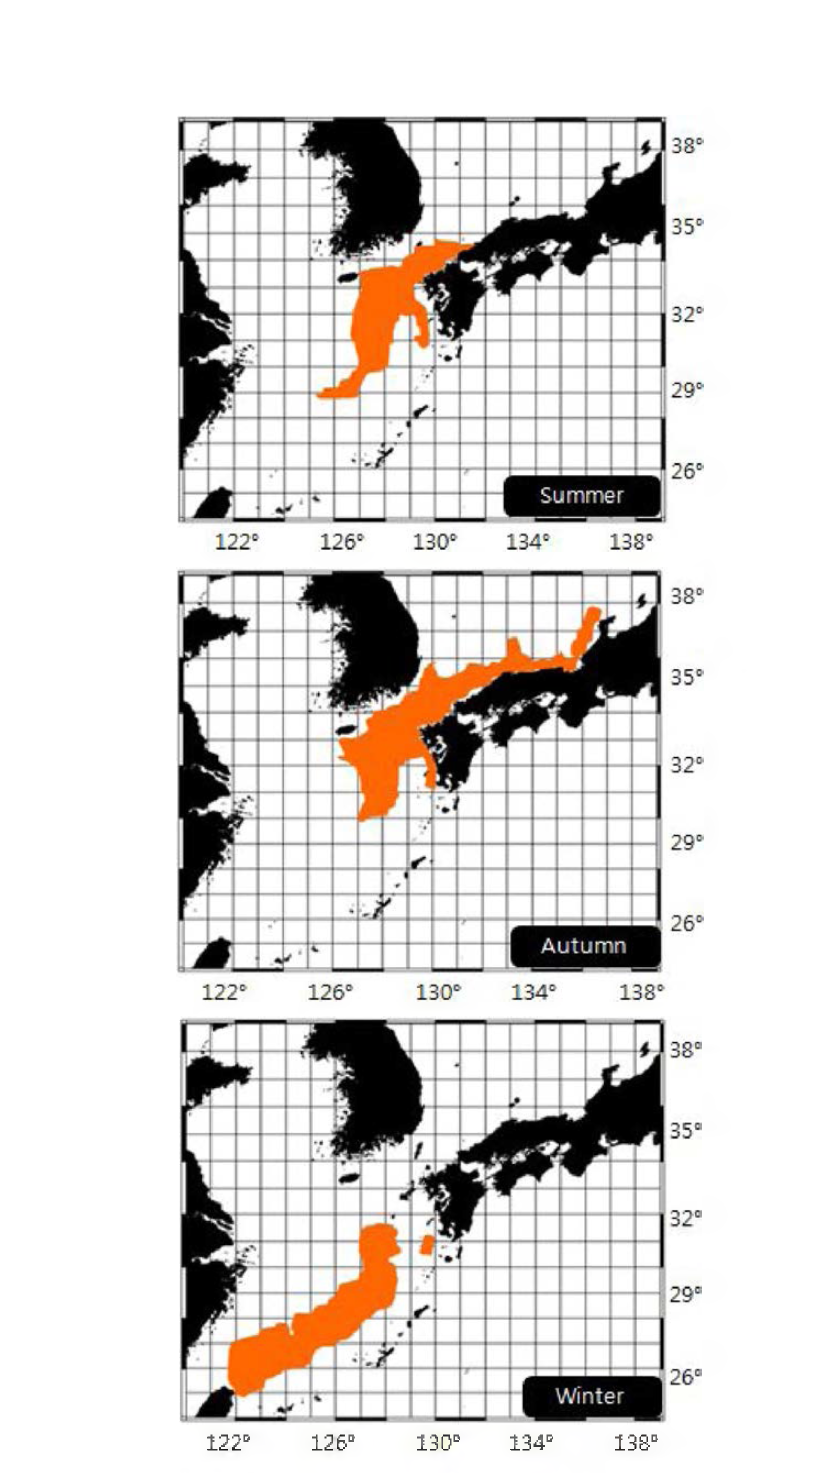 Location of potential spawning area based on water temperature(18-23 °C) and bathymetry(100-500m) for each seasons.